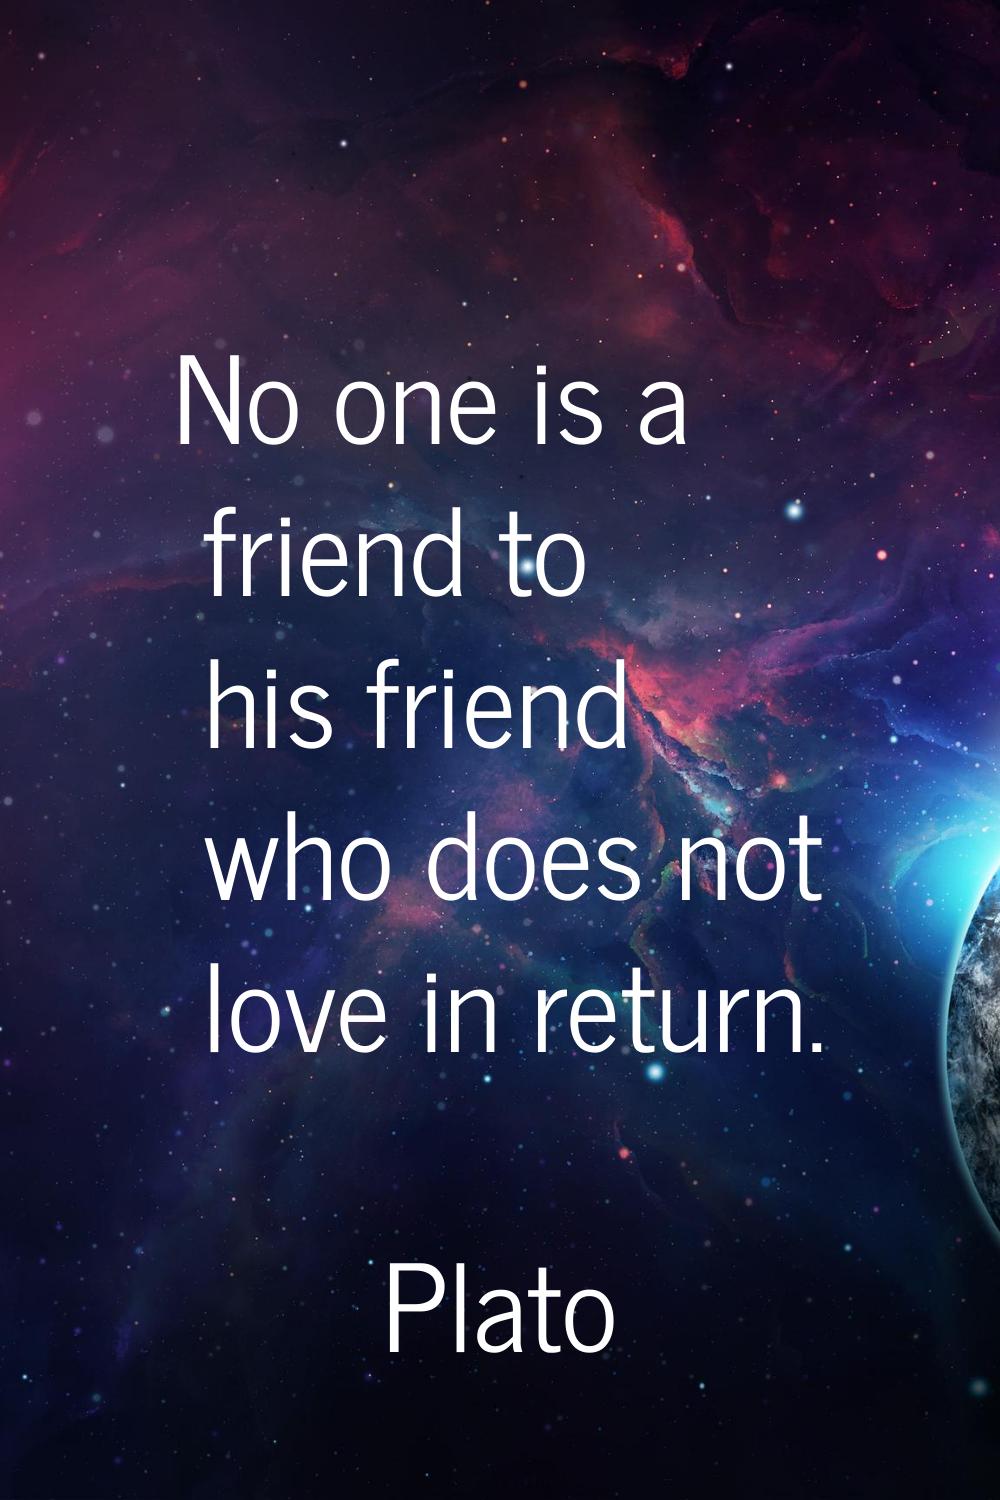 No one is a friend to his friend who does not love in return.